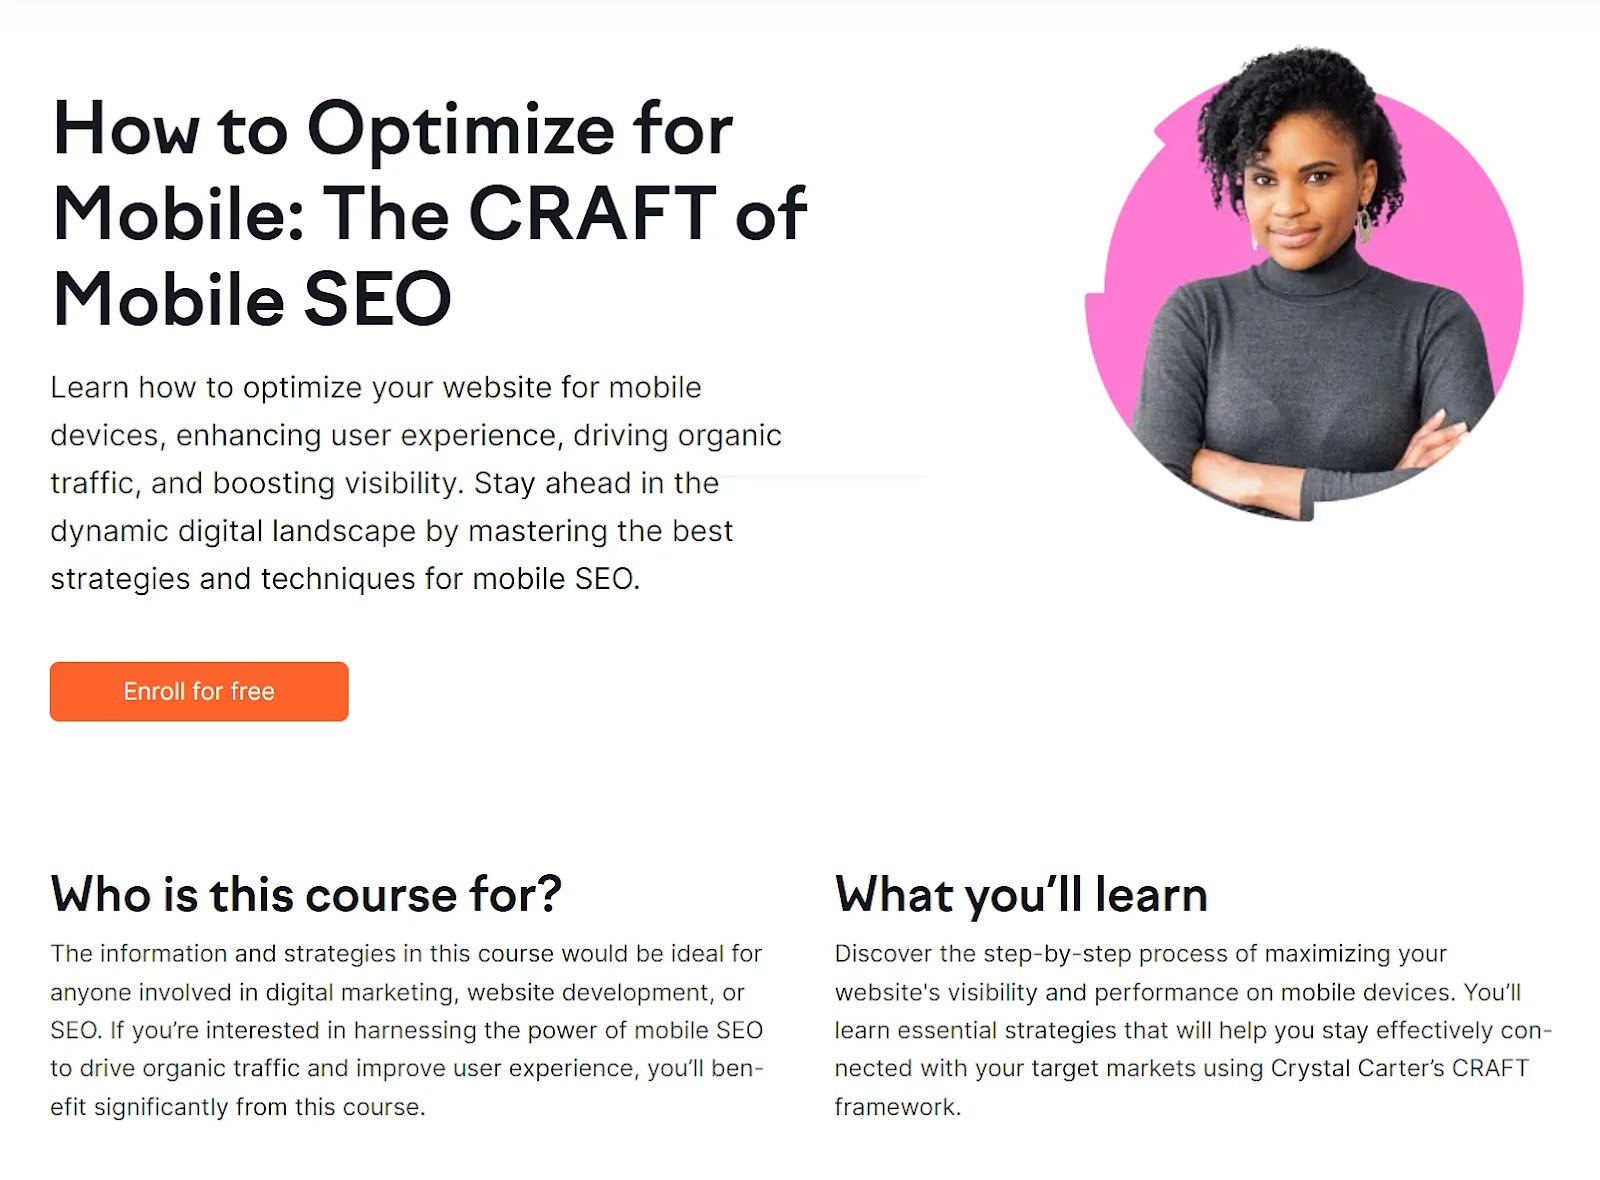 "How to Optimize Mobile: The CRAFT of Mobile SEO" course landing page